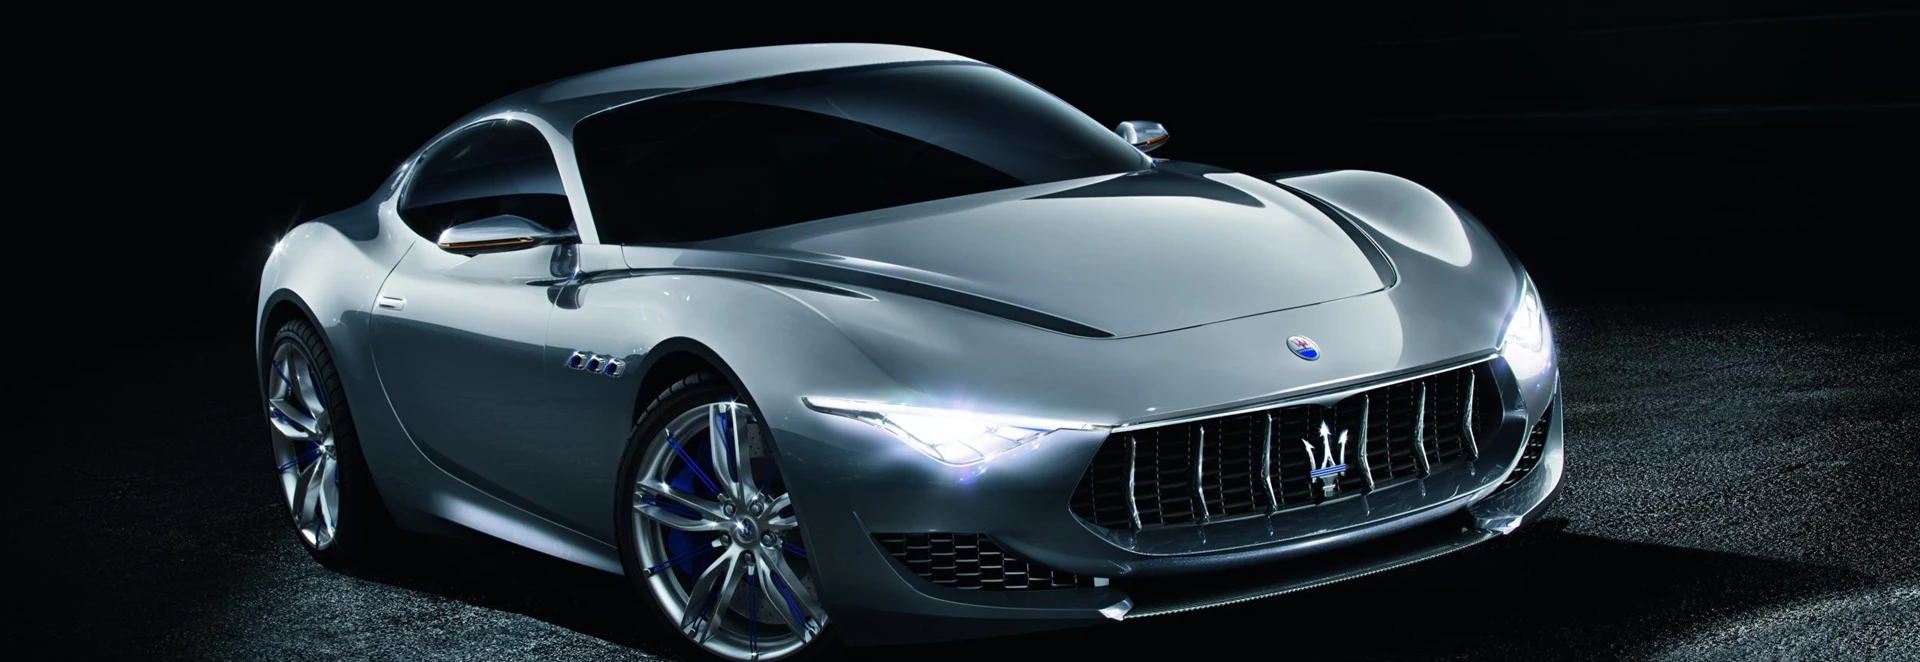 Maserati cars to be electric only after 2019 